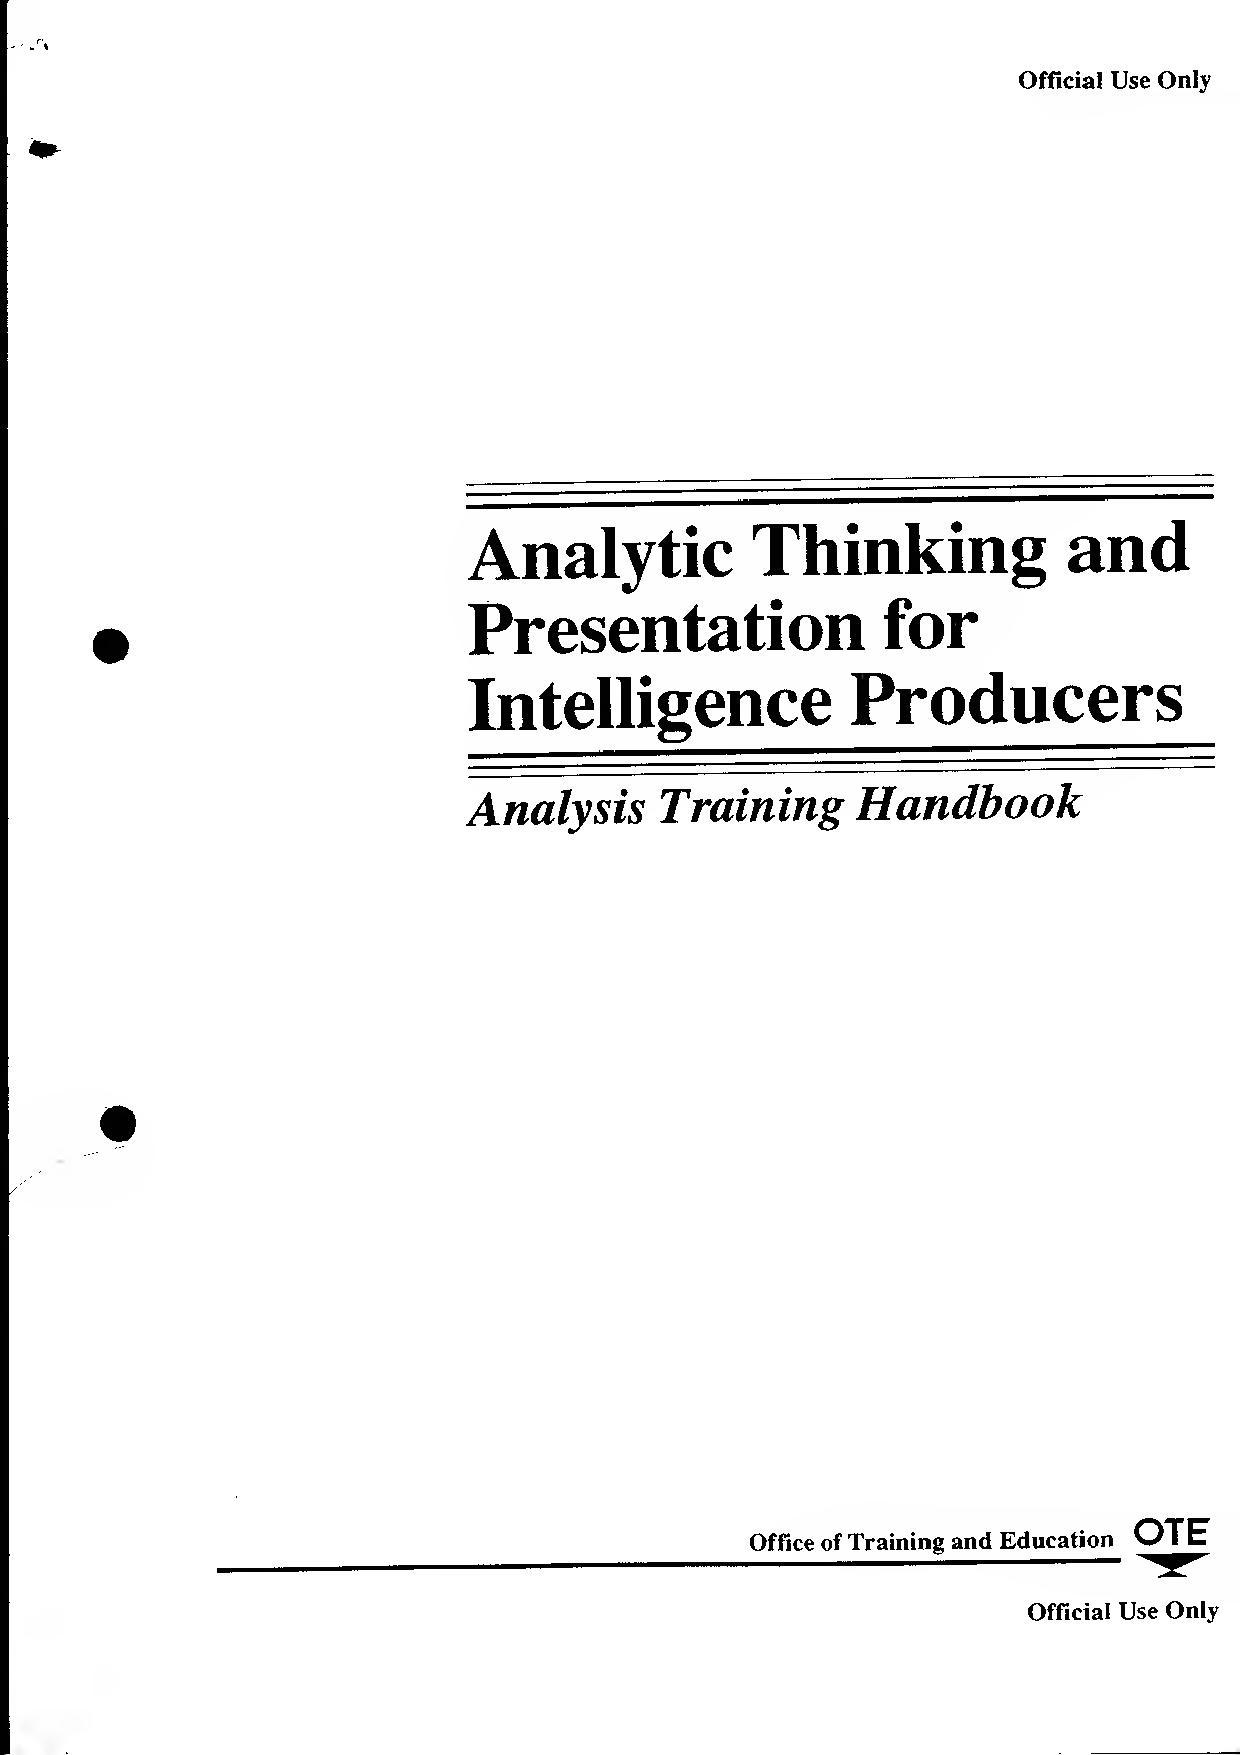 CIA Analytic Thinking and Presentation for Intelligence Analysis Training Handbook (2016) by CIA